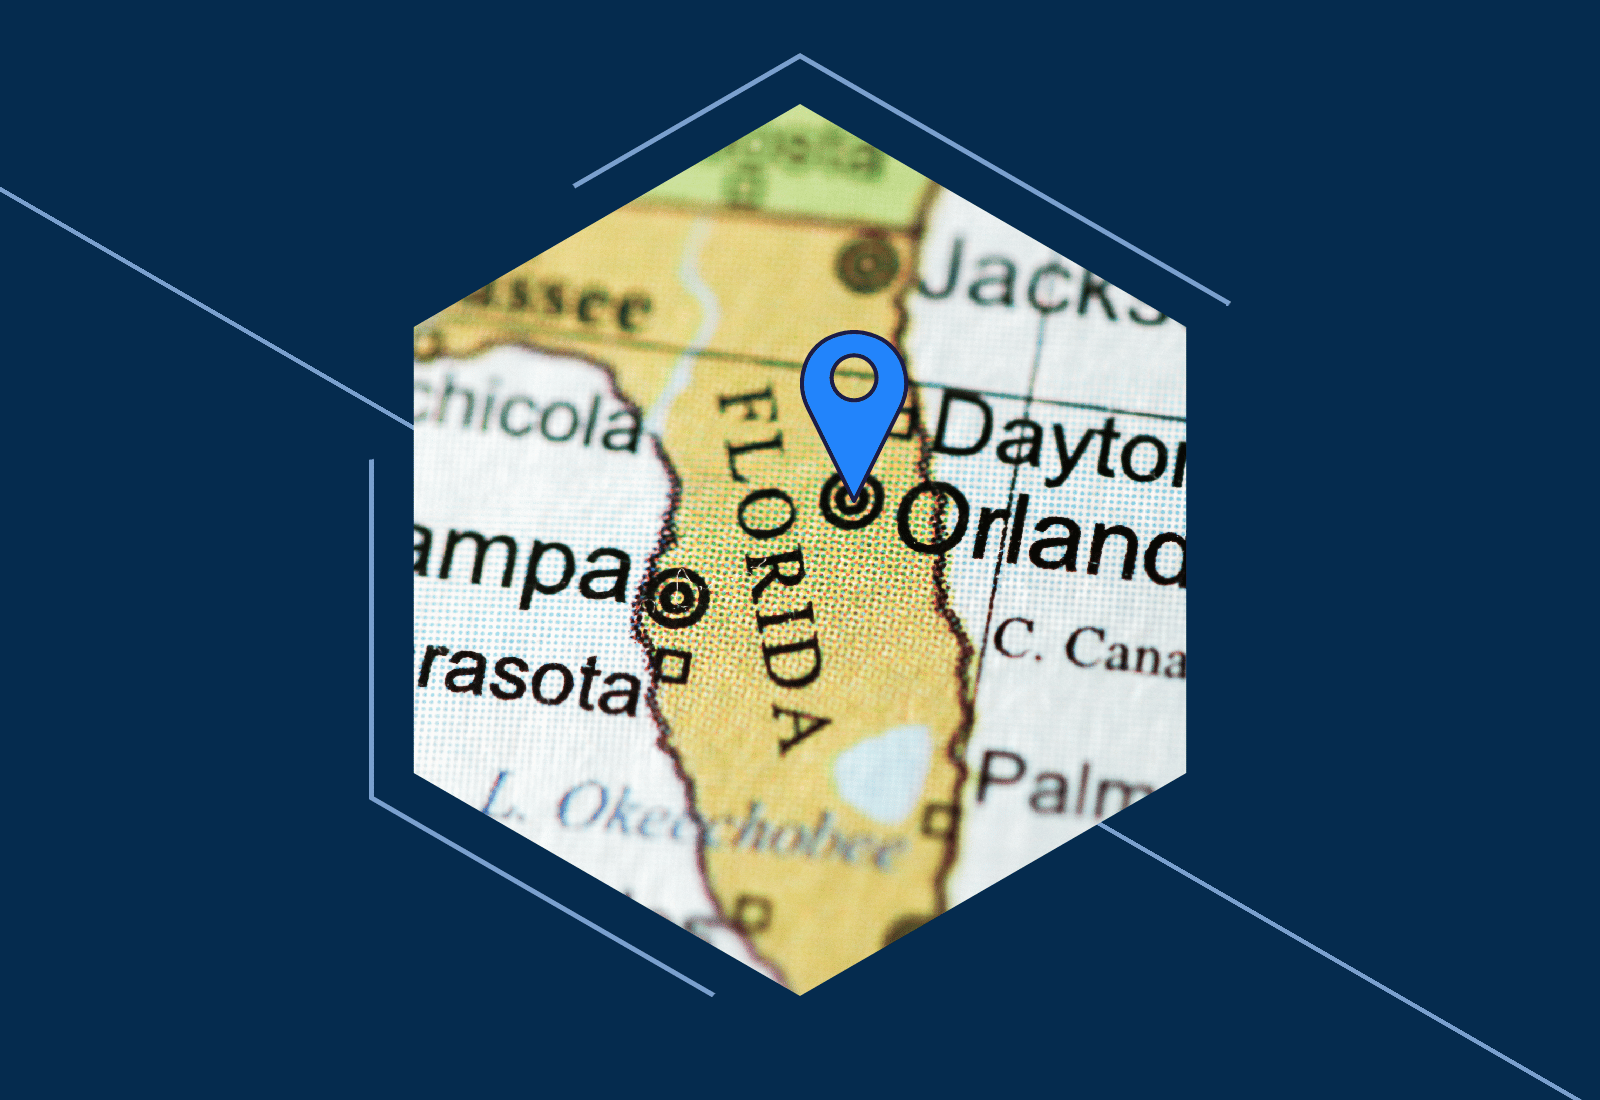 map of Florida with location tag on Orlando